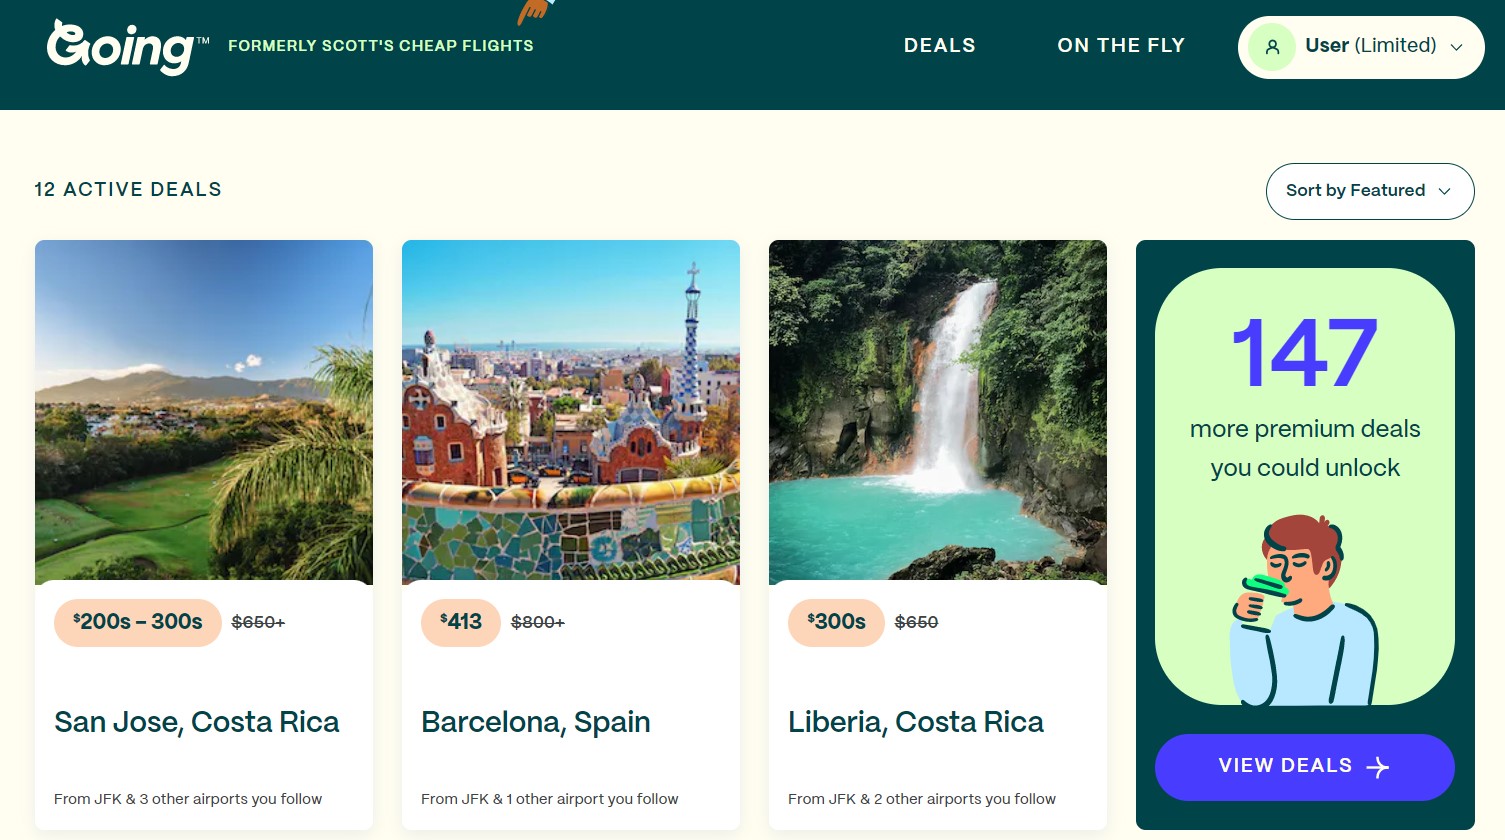 Screenshot from the Going travel website showing 12 active flight deals on the limited membership